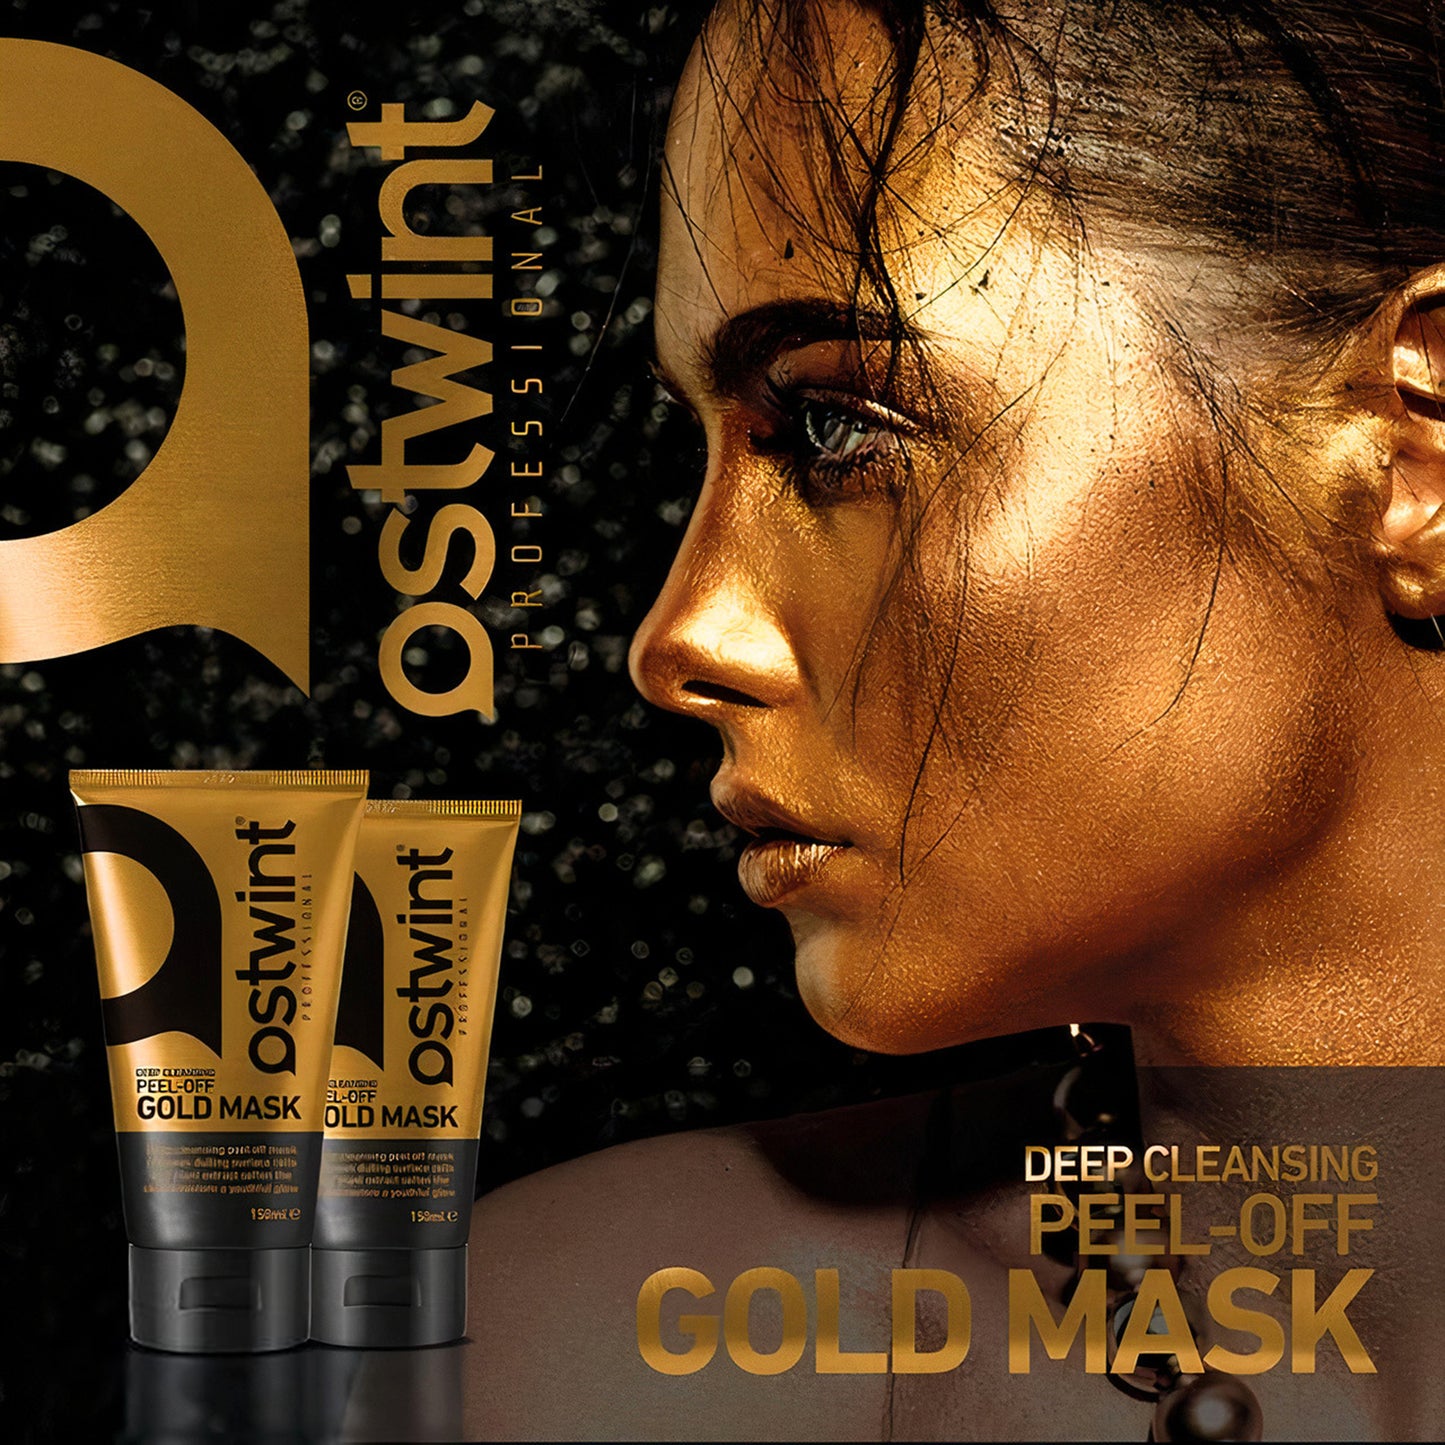 Ostwint Deep Cleansing Peel-Off Gold Mask